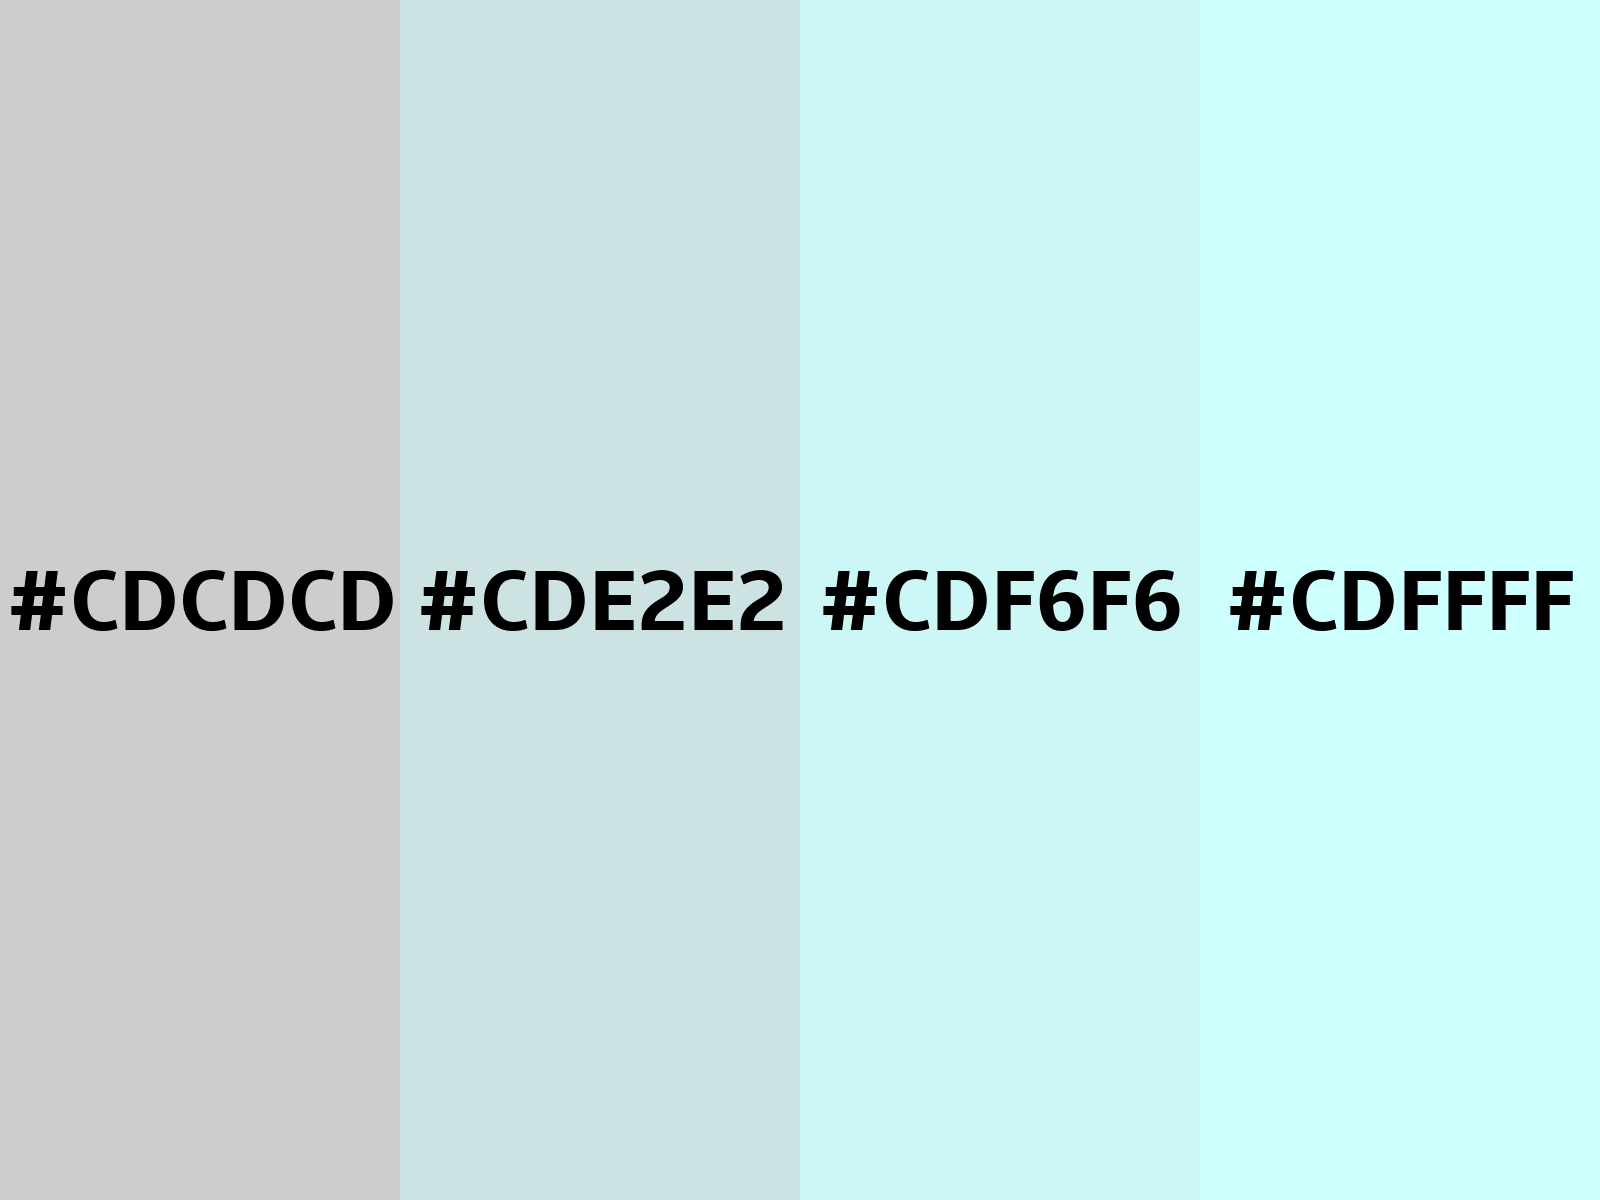 HEX color #CDCDCD, Color name: Very Light Grey, RGB(205,205,205), Windows:  13487565. - HTML CSS Color